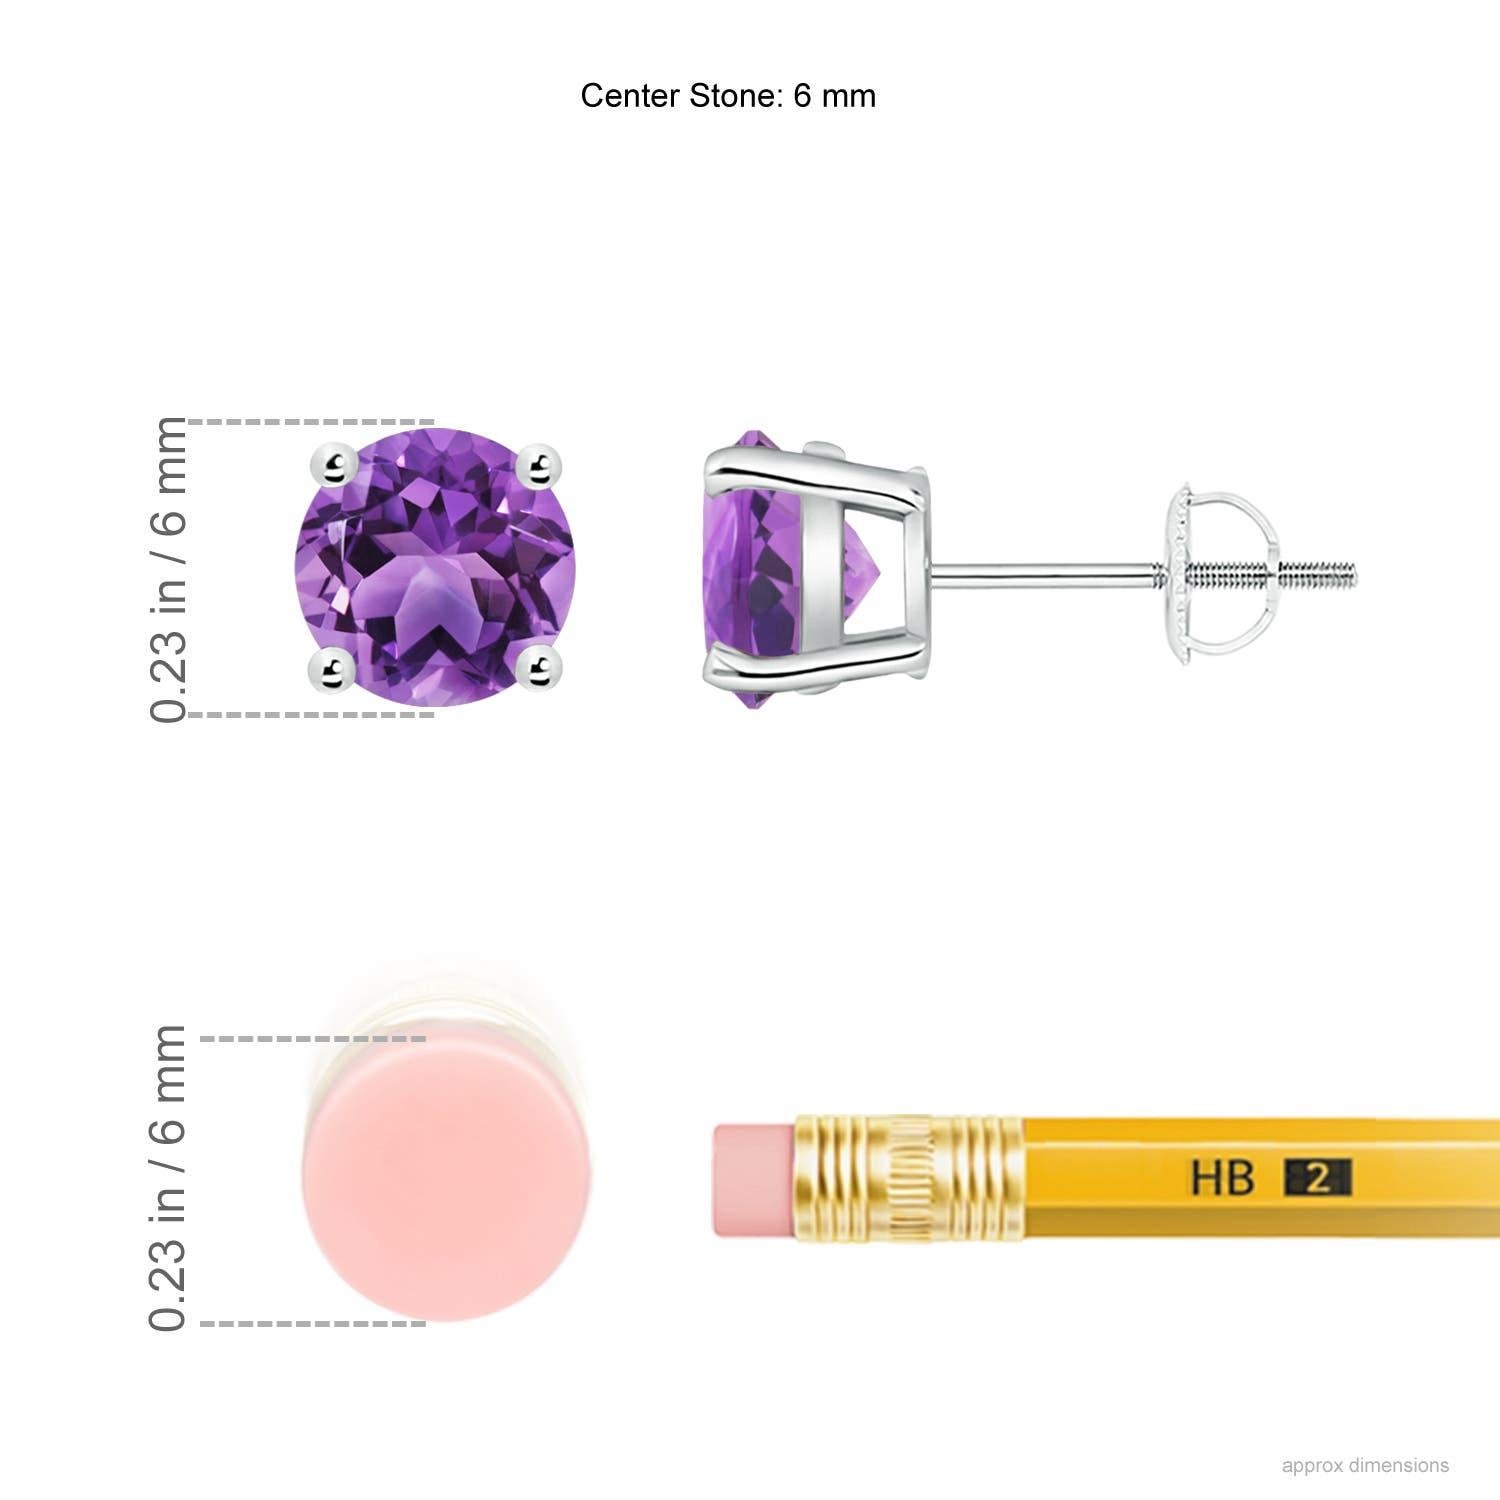 Simple and elegant, these amethyst solitaire stud earrings are set in platinum. The round amethysts exhibit their mysterious purple allure with a sparkle. They are held in a basket-style prong setting for added brilliance.